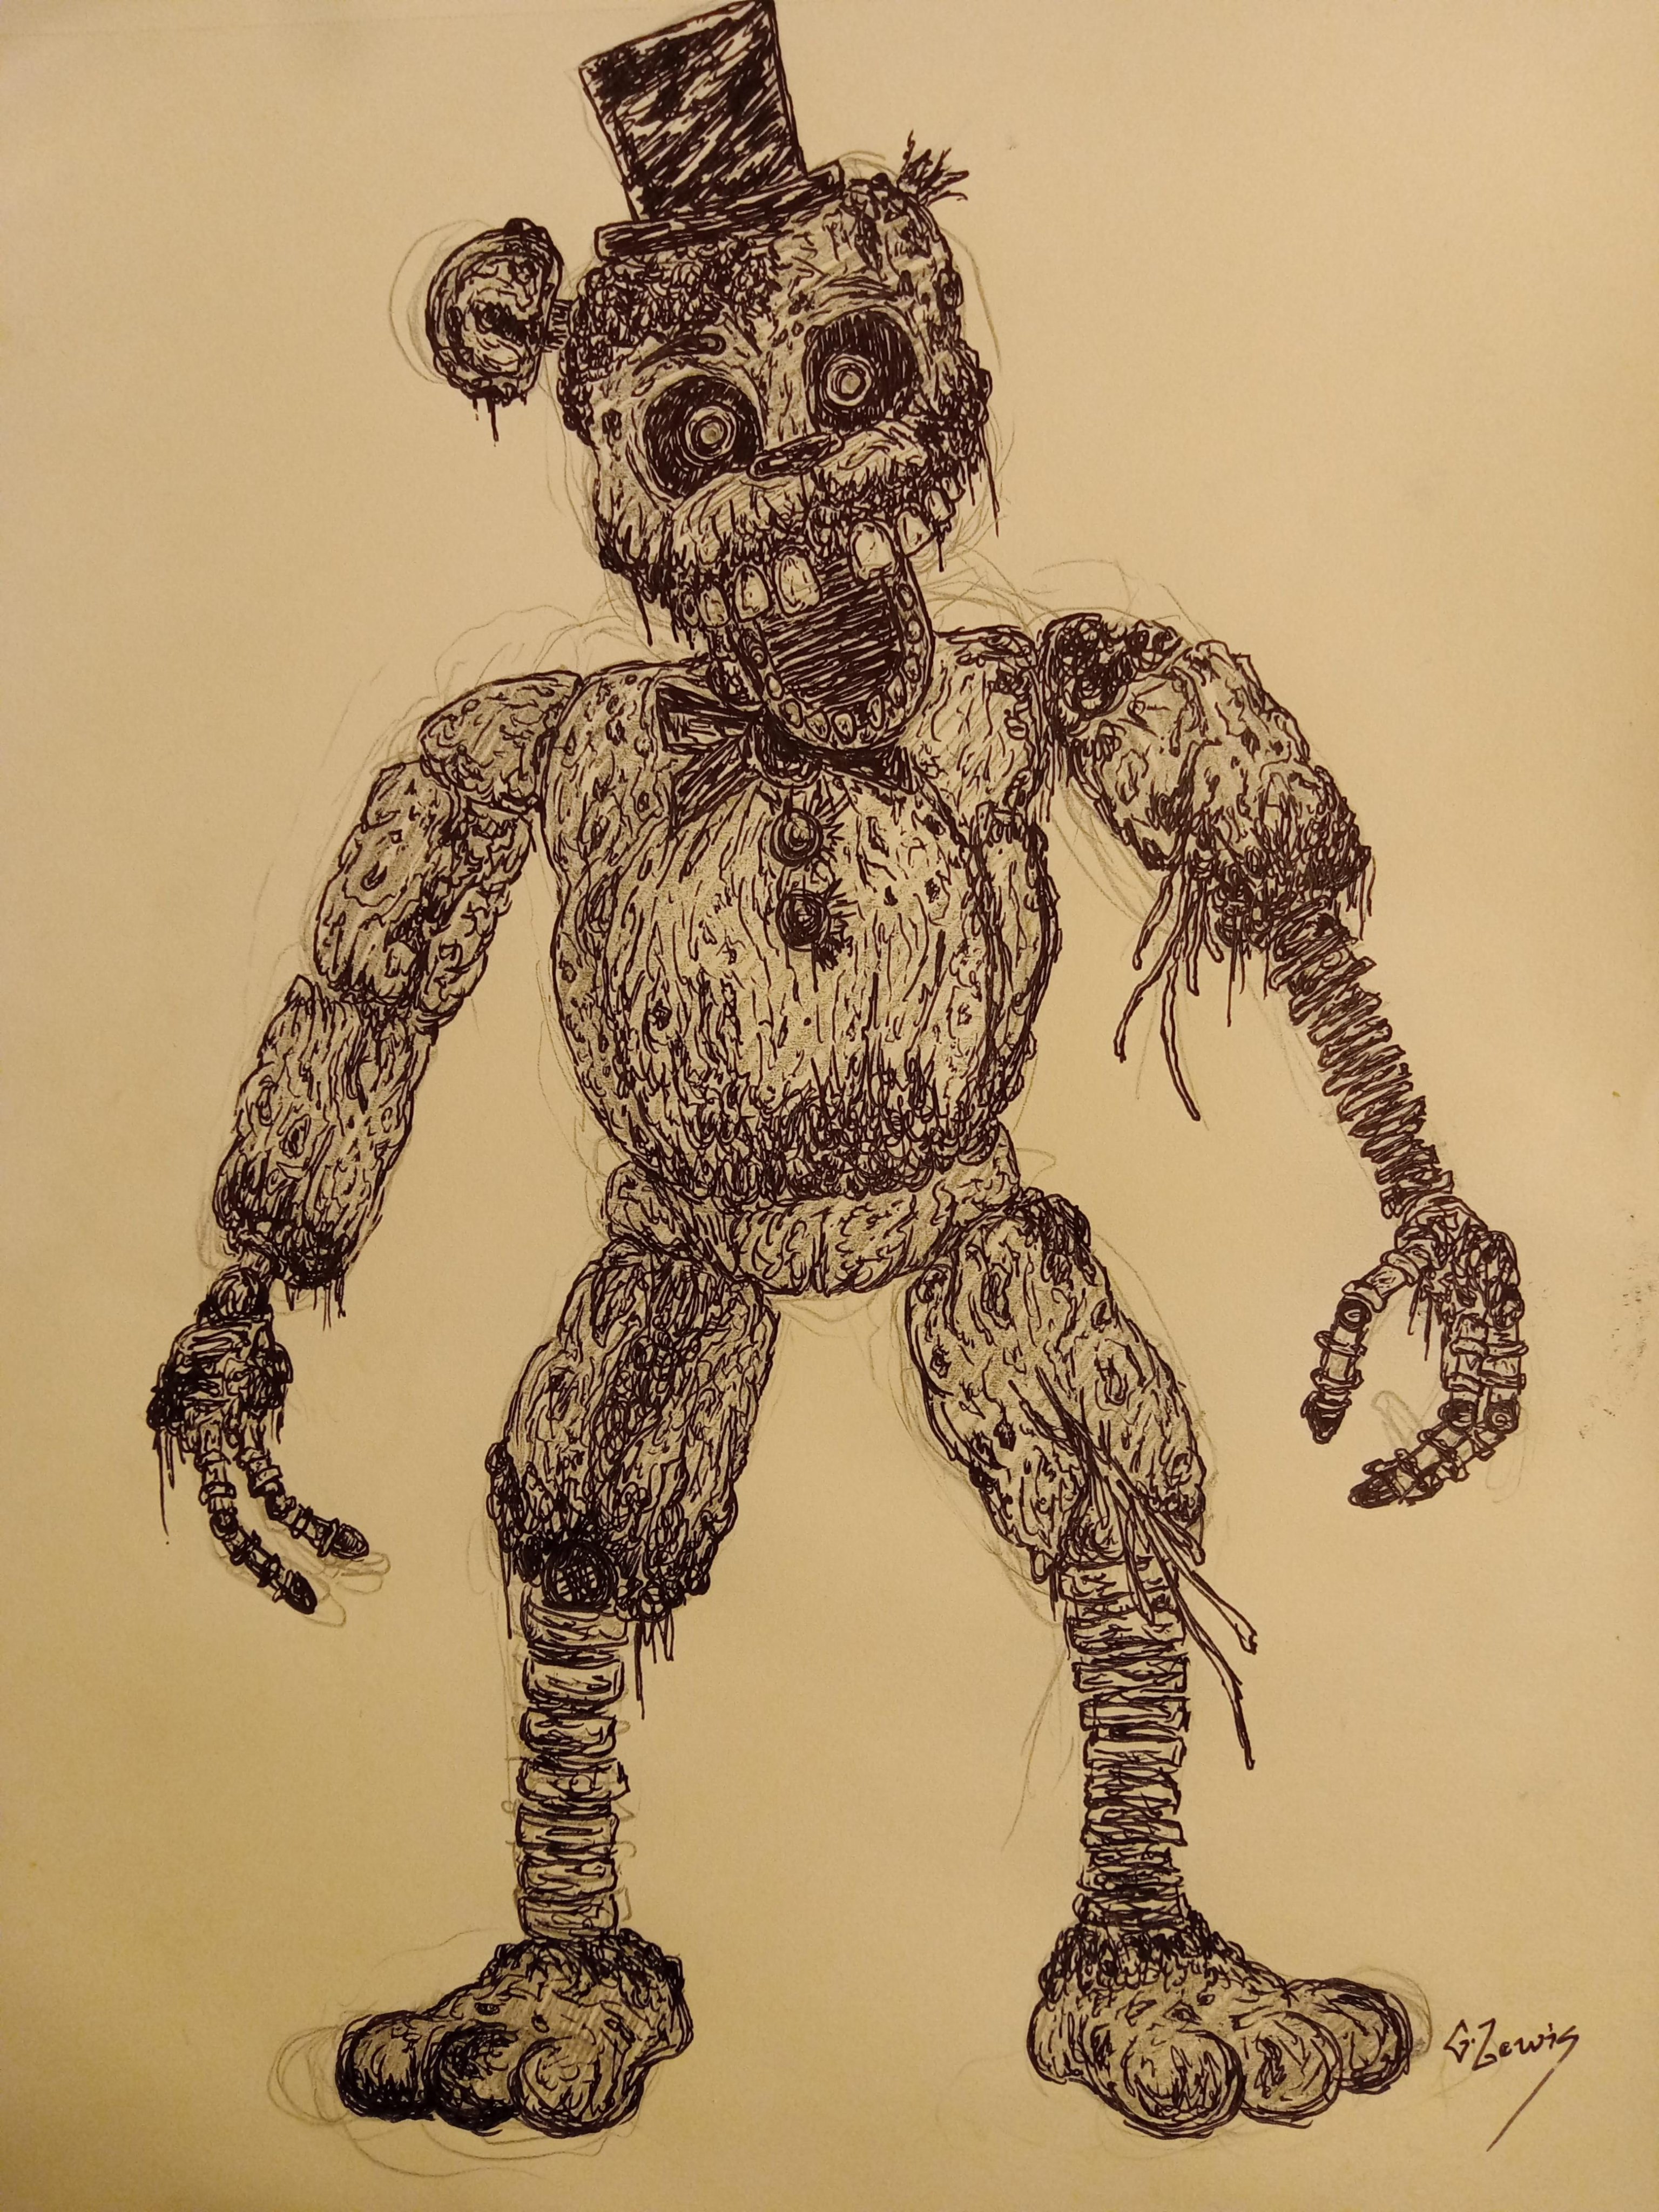 GJ-Lewis X on X: My redesign pitch for the ignited animatronics in  Nikson's upcoming #FazbearFanverse project The Joy of Creation: Ignited  Collection. I decide to share them here to see if anyone